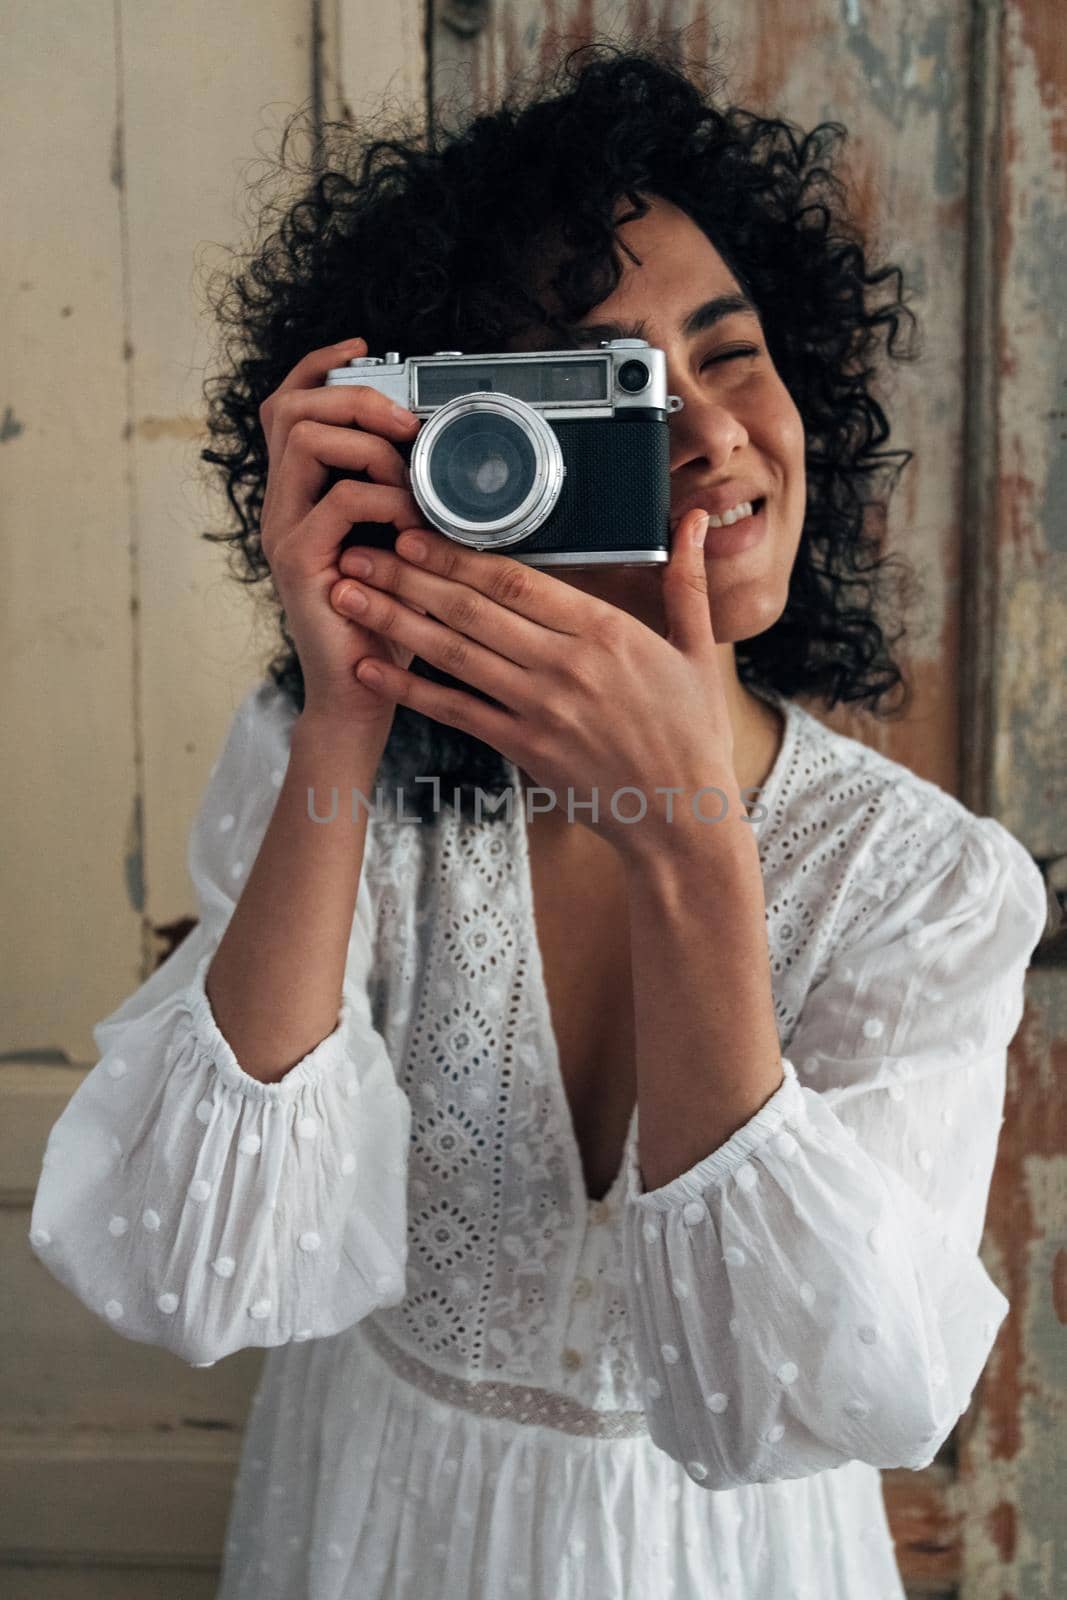 Portrait of young multiracial woman holding vintage style camera taking a picture looking at camera. Vertical image. Tourism and lifestyle concept.